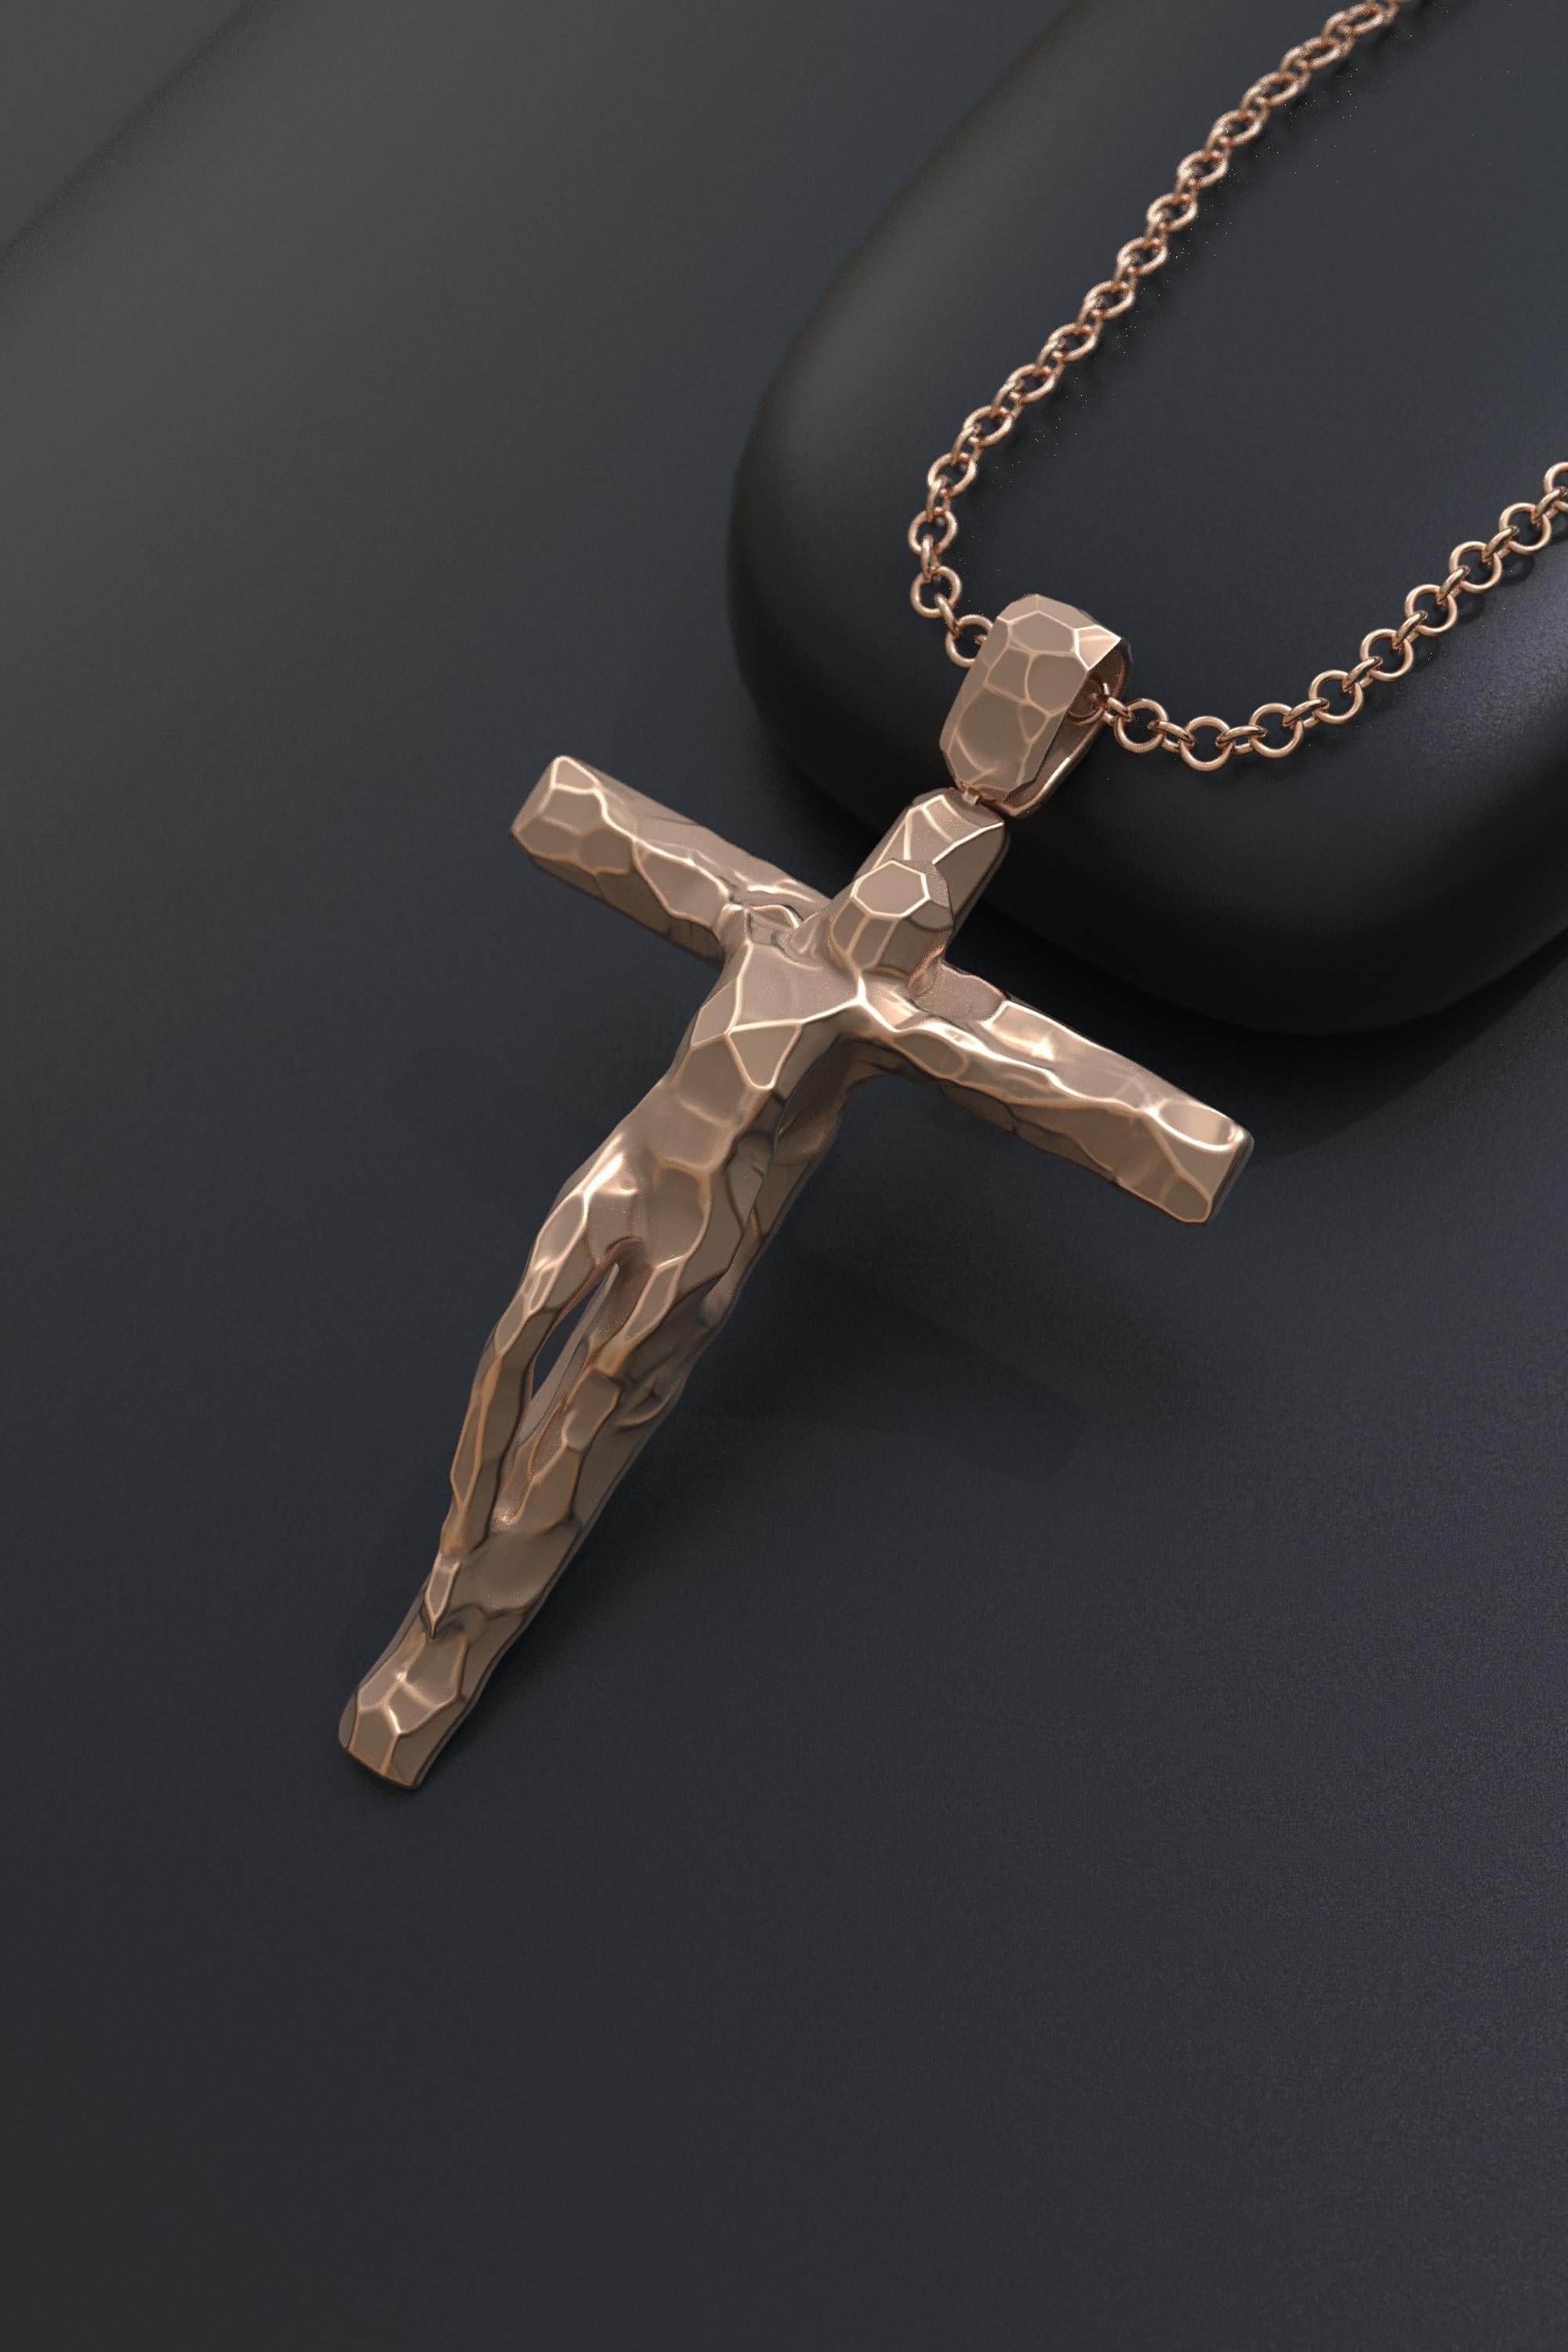 9ct Gold Crucifix pendant Italy 2.8cm. Made in Italy by UnoAerre.